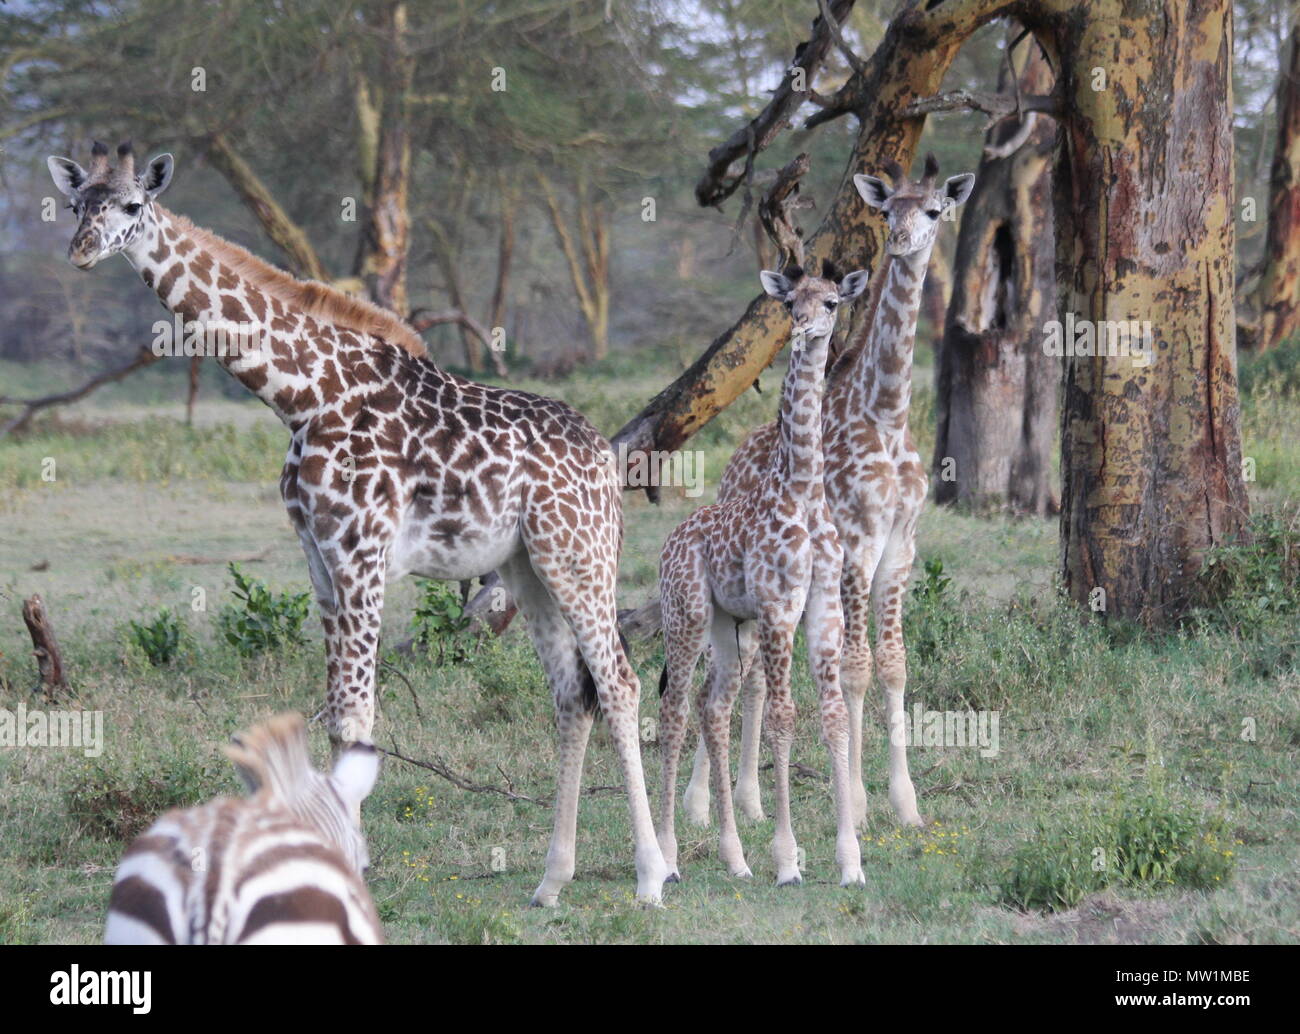 Baby giraffes in the forest Stock Photo